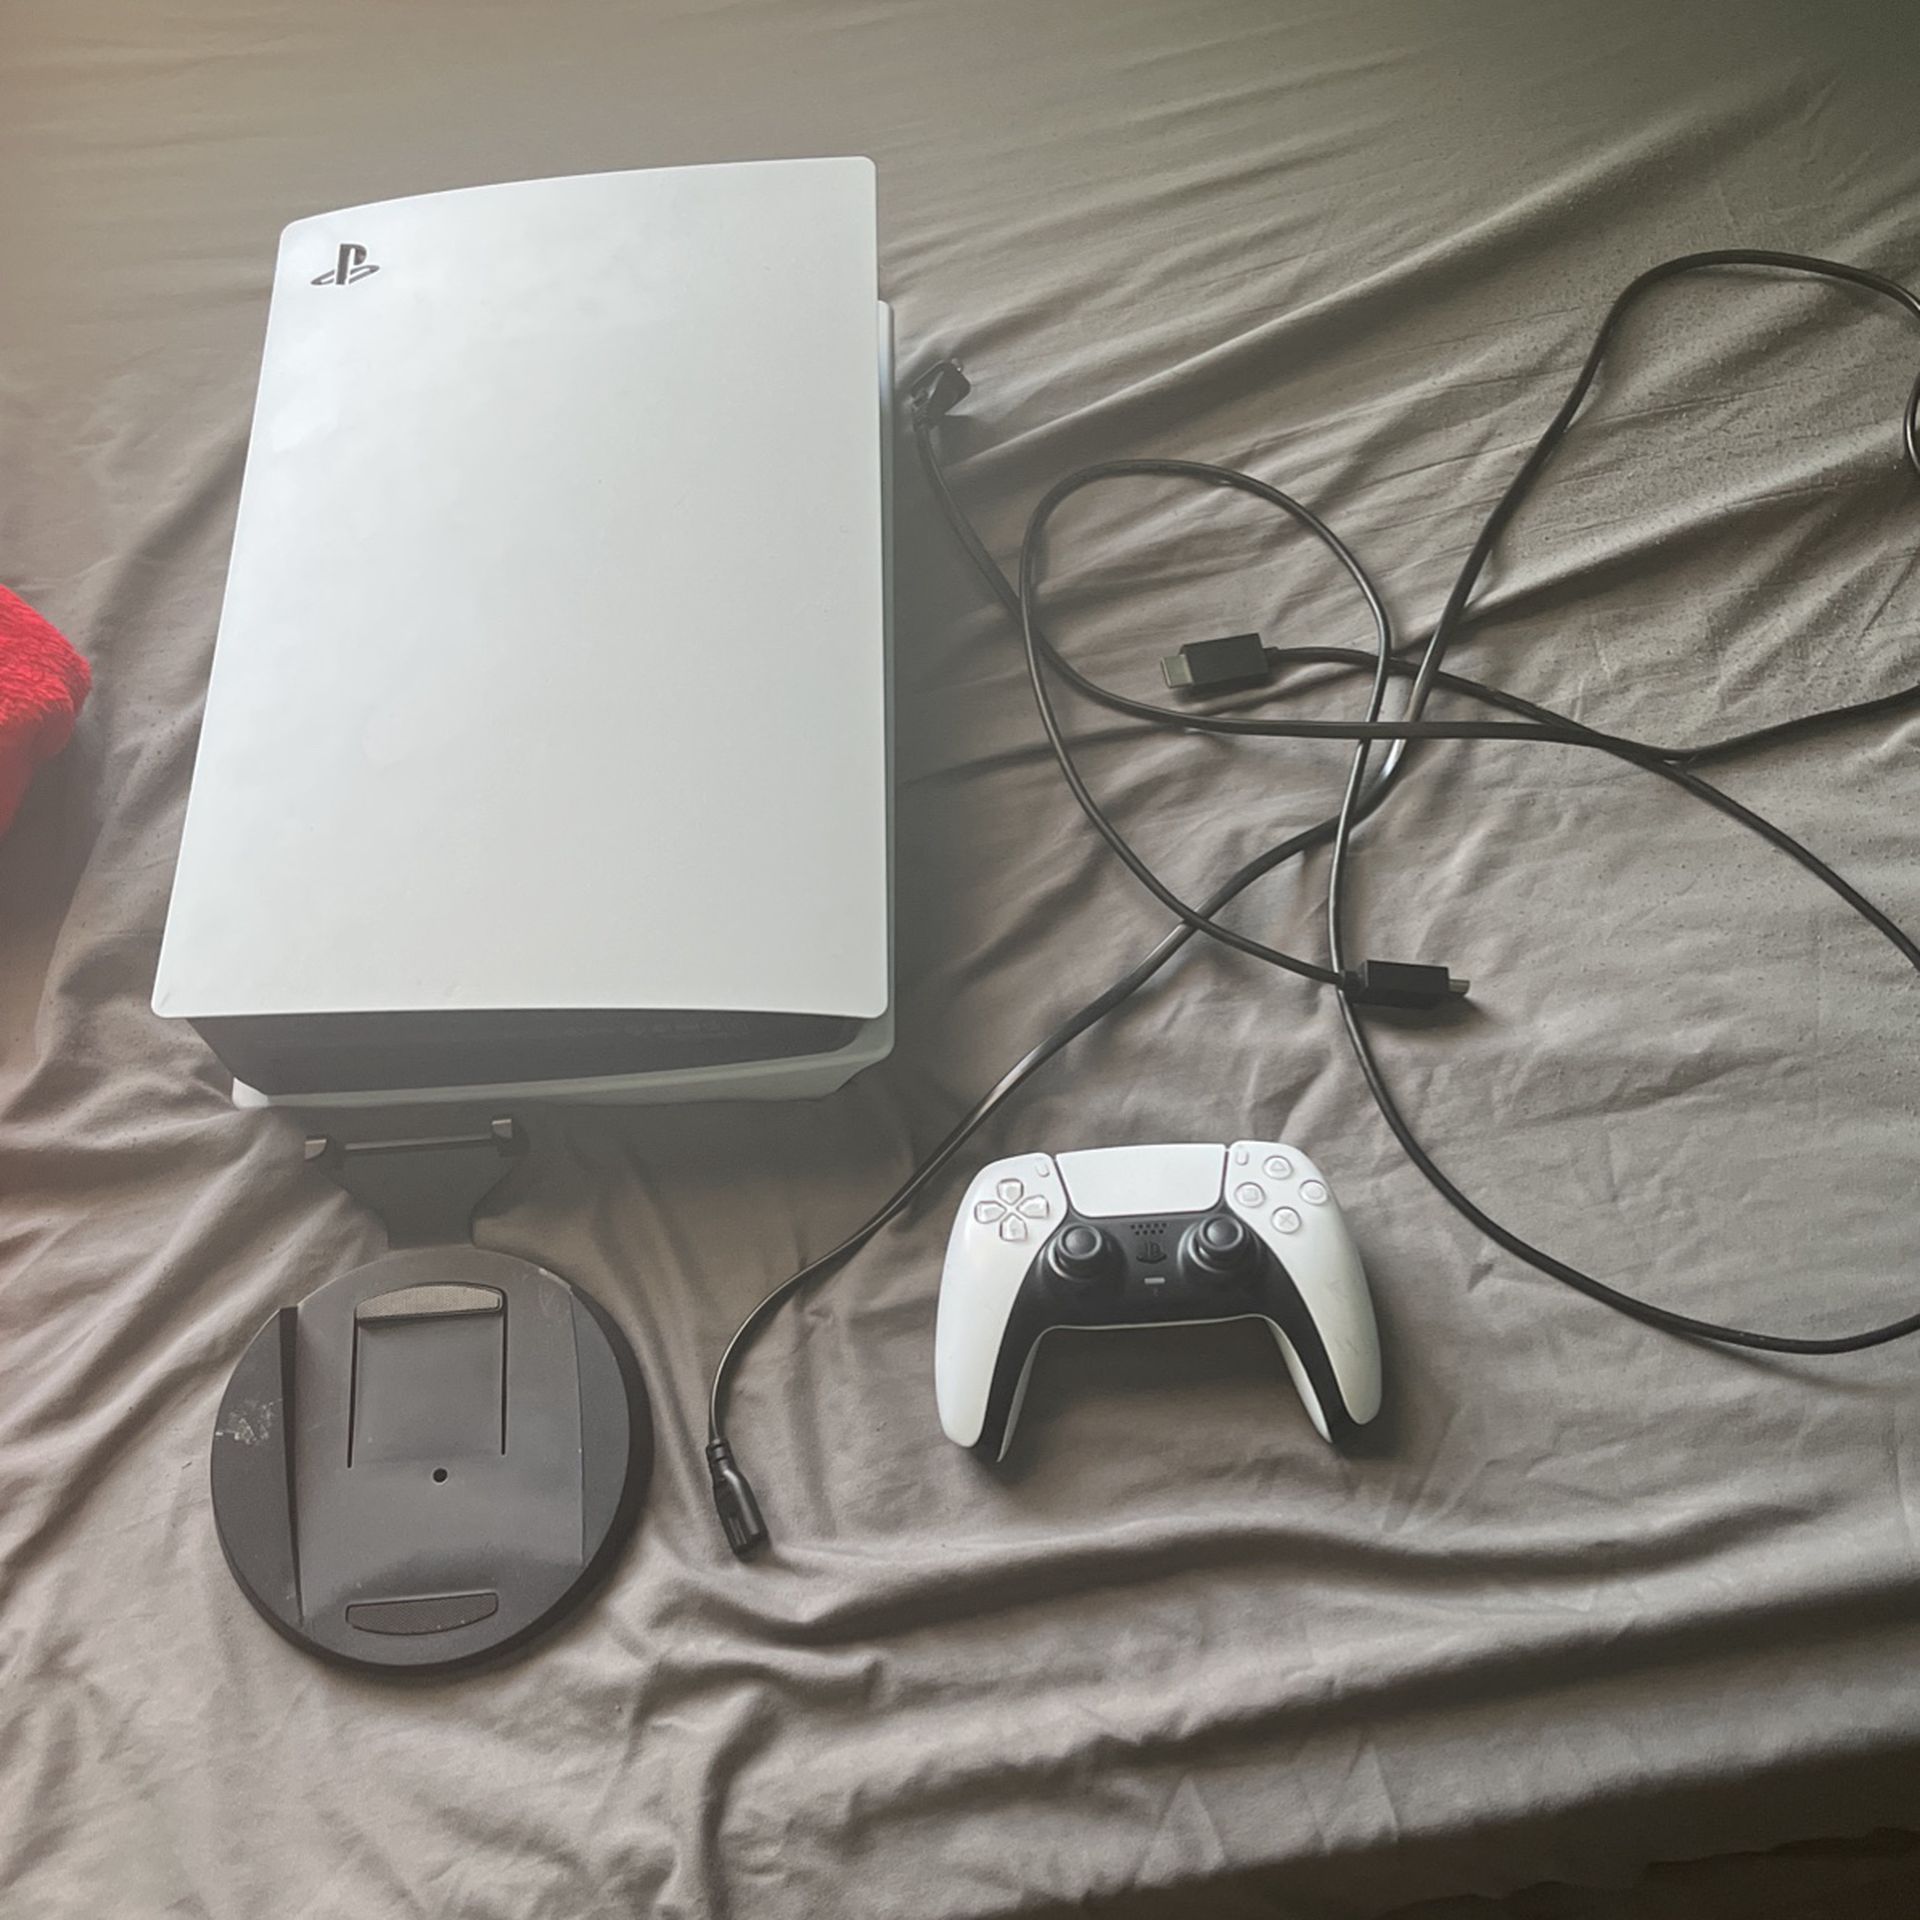 Used Ps5 Like New/ White/size Regular. 825 GB